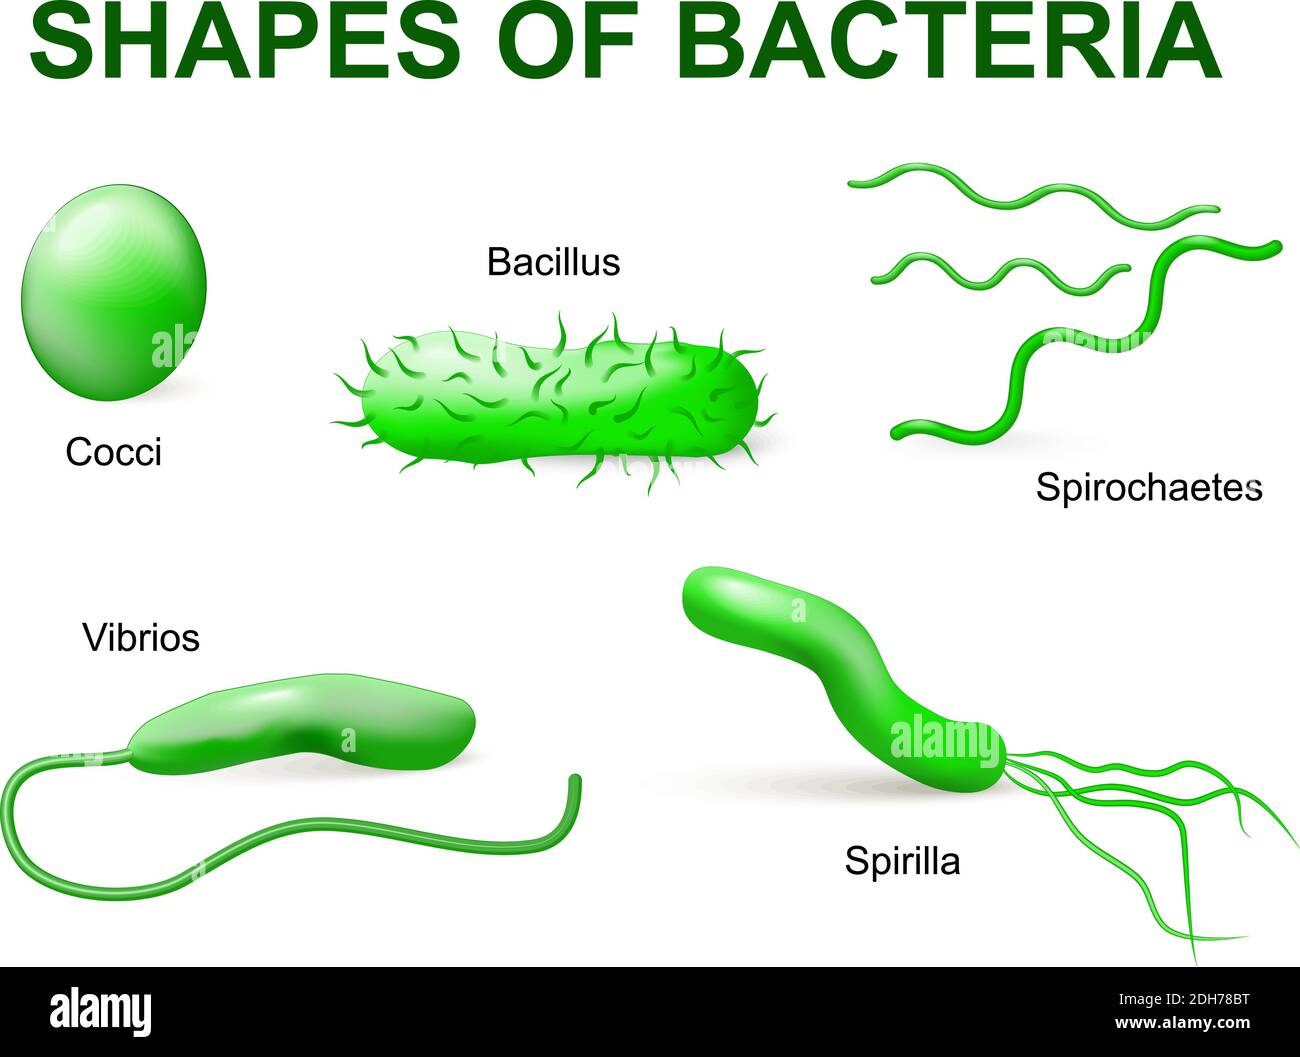 Common bacteria infecting human. vector illustration. Bacteria are classified into 5 groups according to their basic shapes: spherical (cocci), rod Stock Vector